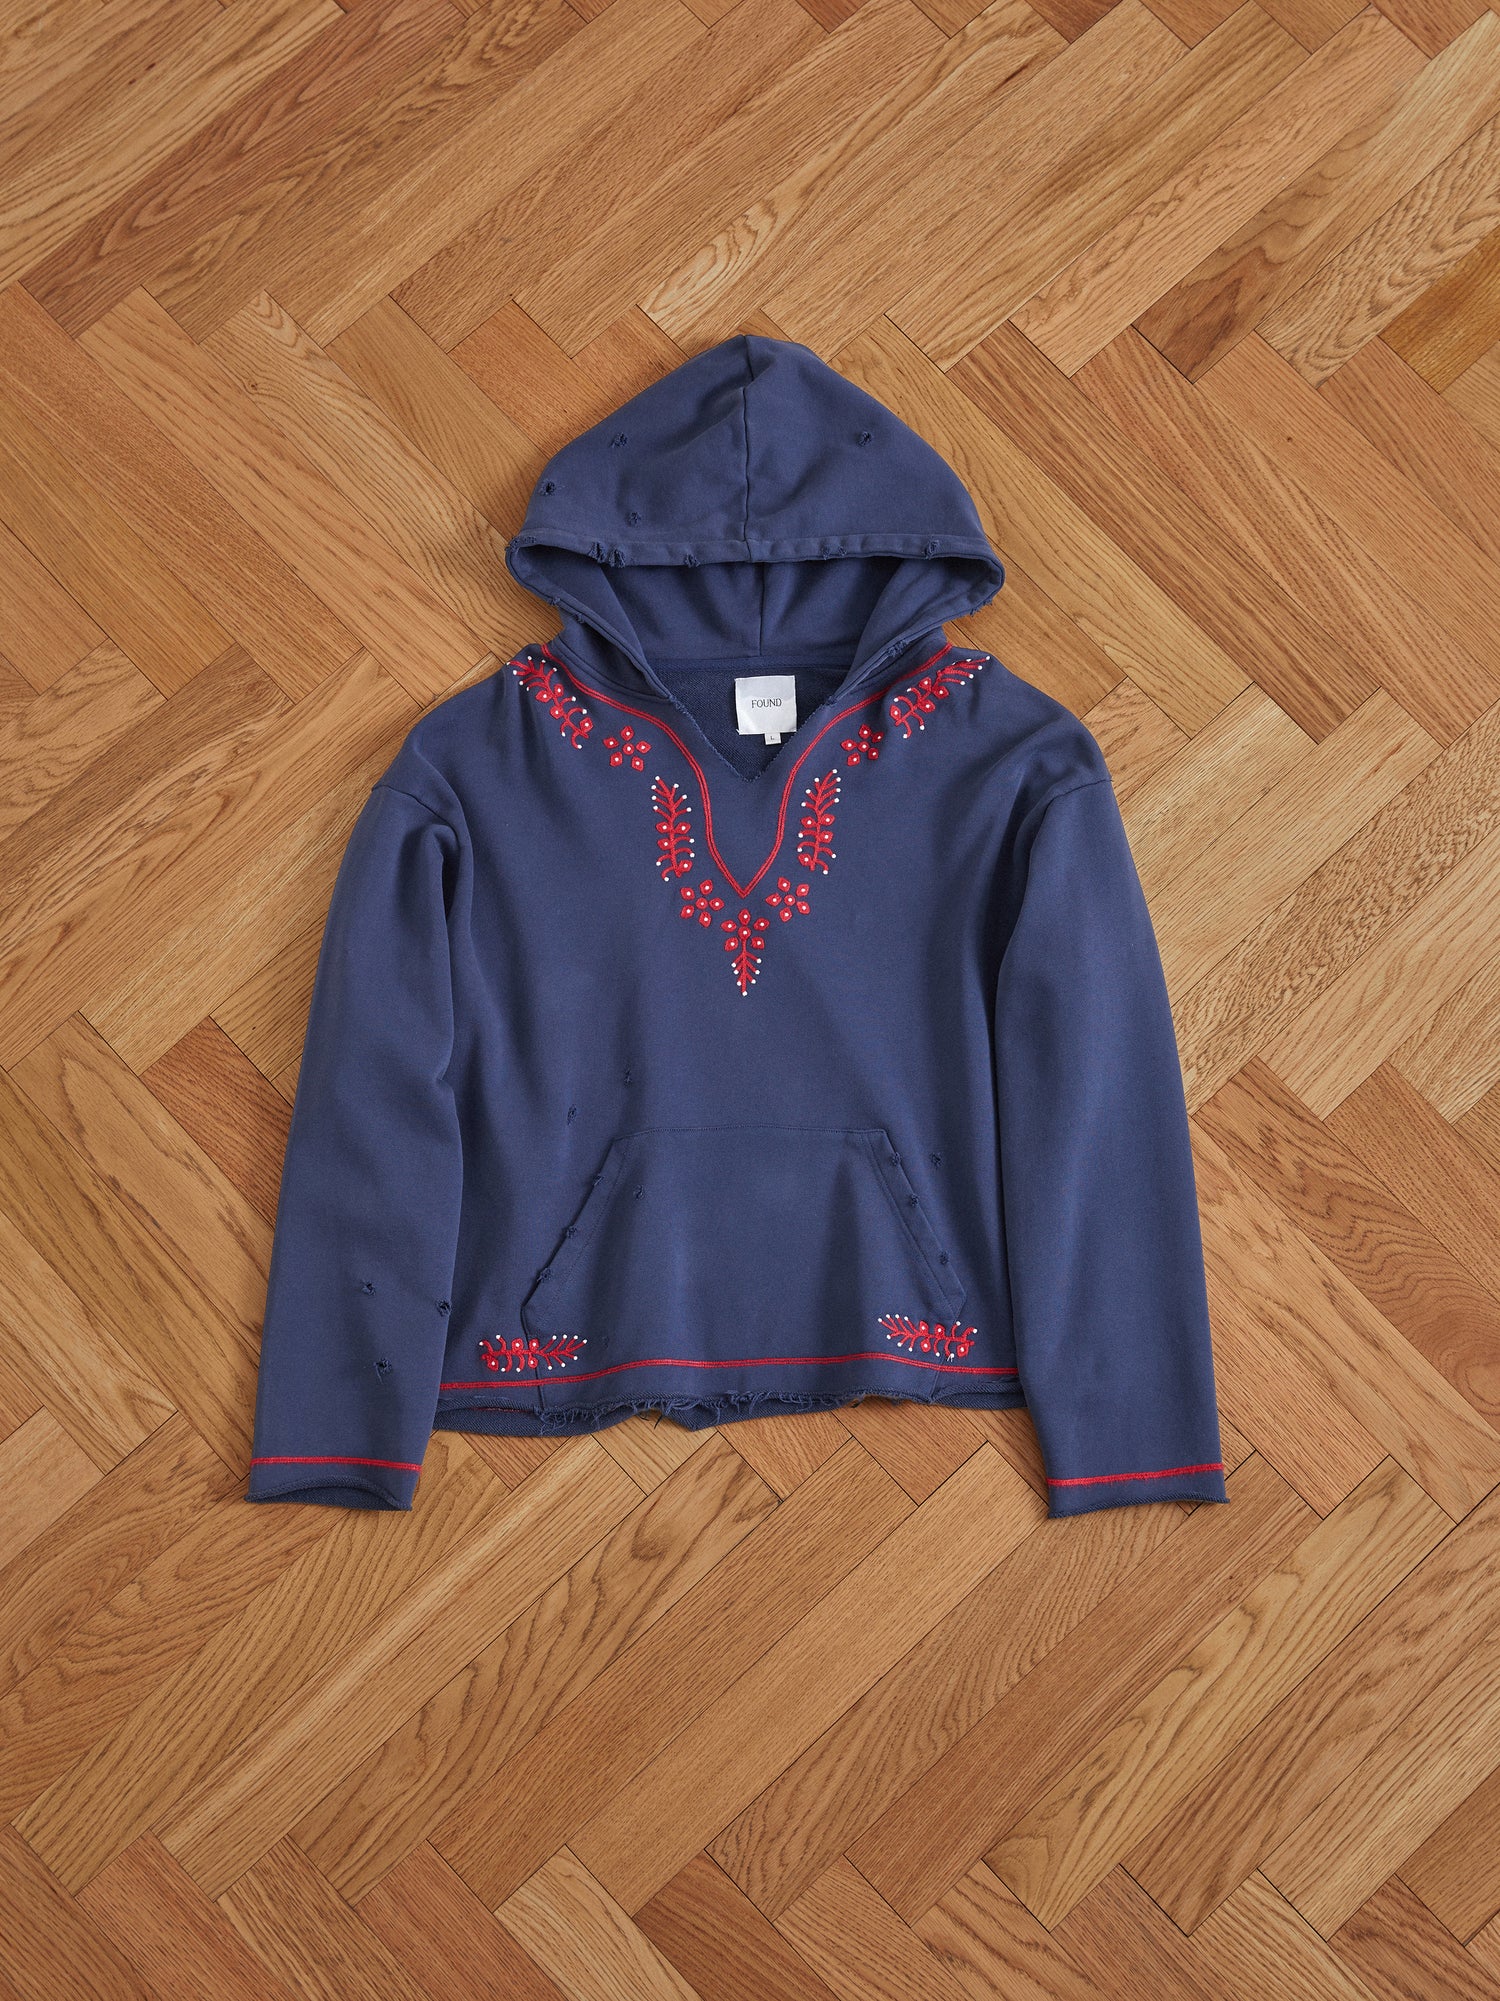 An Indus Embroidered Hoodie in blue on a wooden floor by Found.